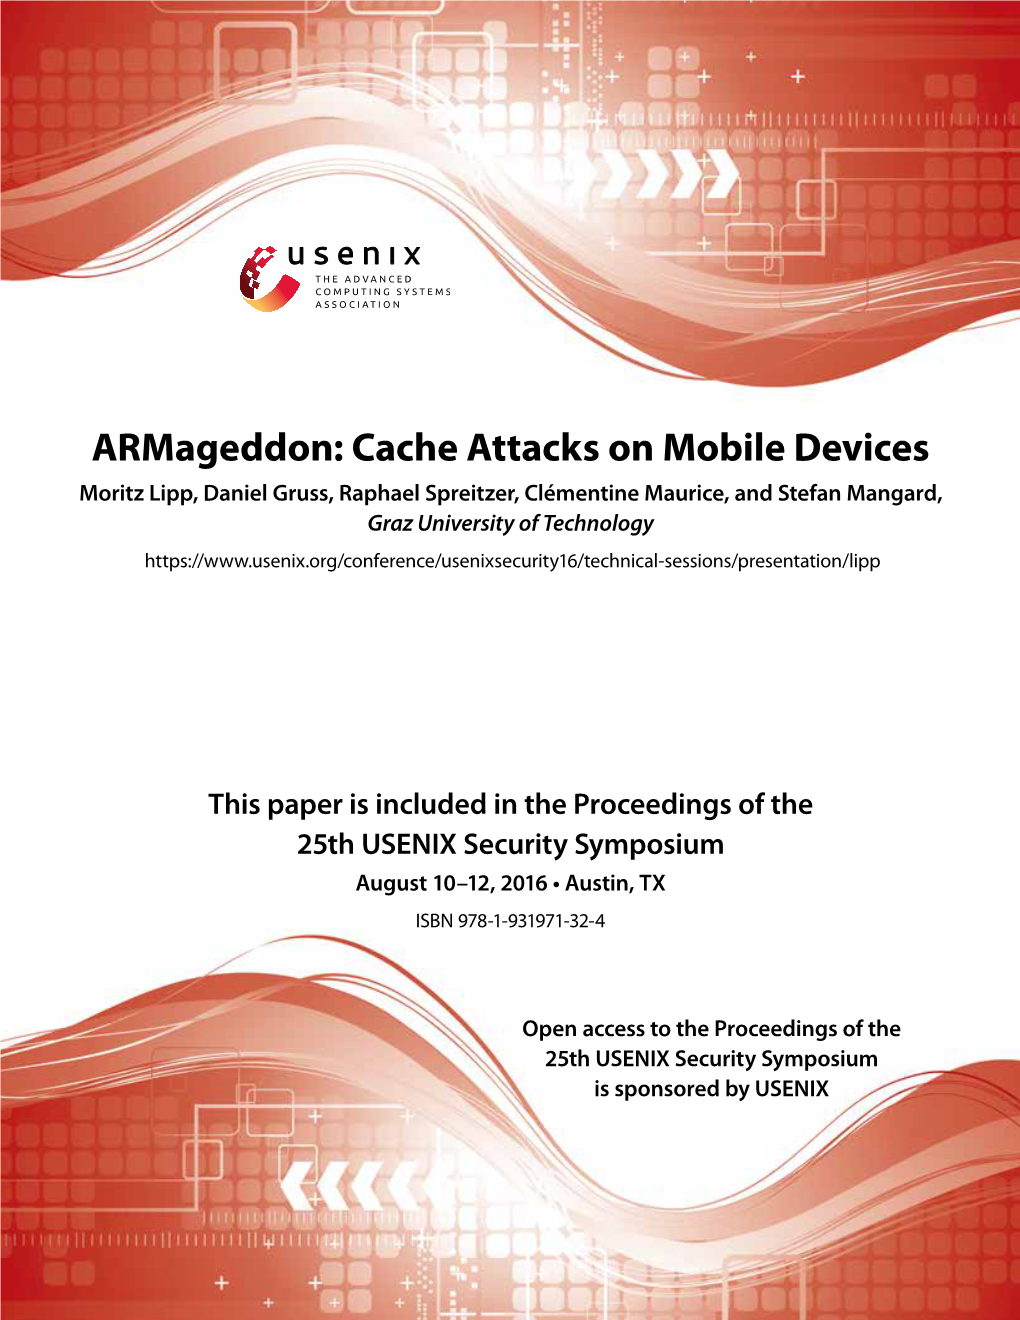 Armageddon: Cache Attacks on Mobile Devices